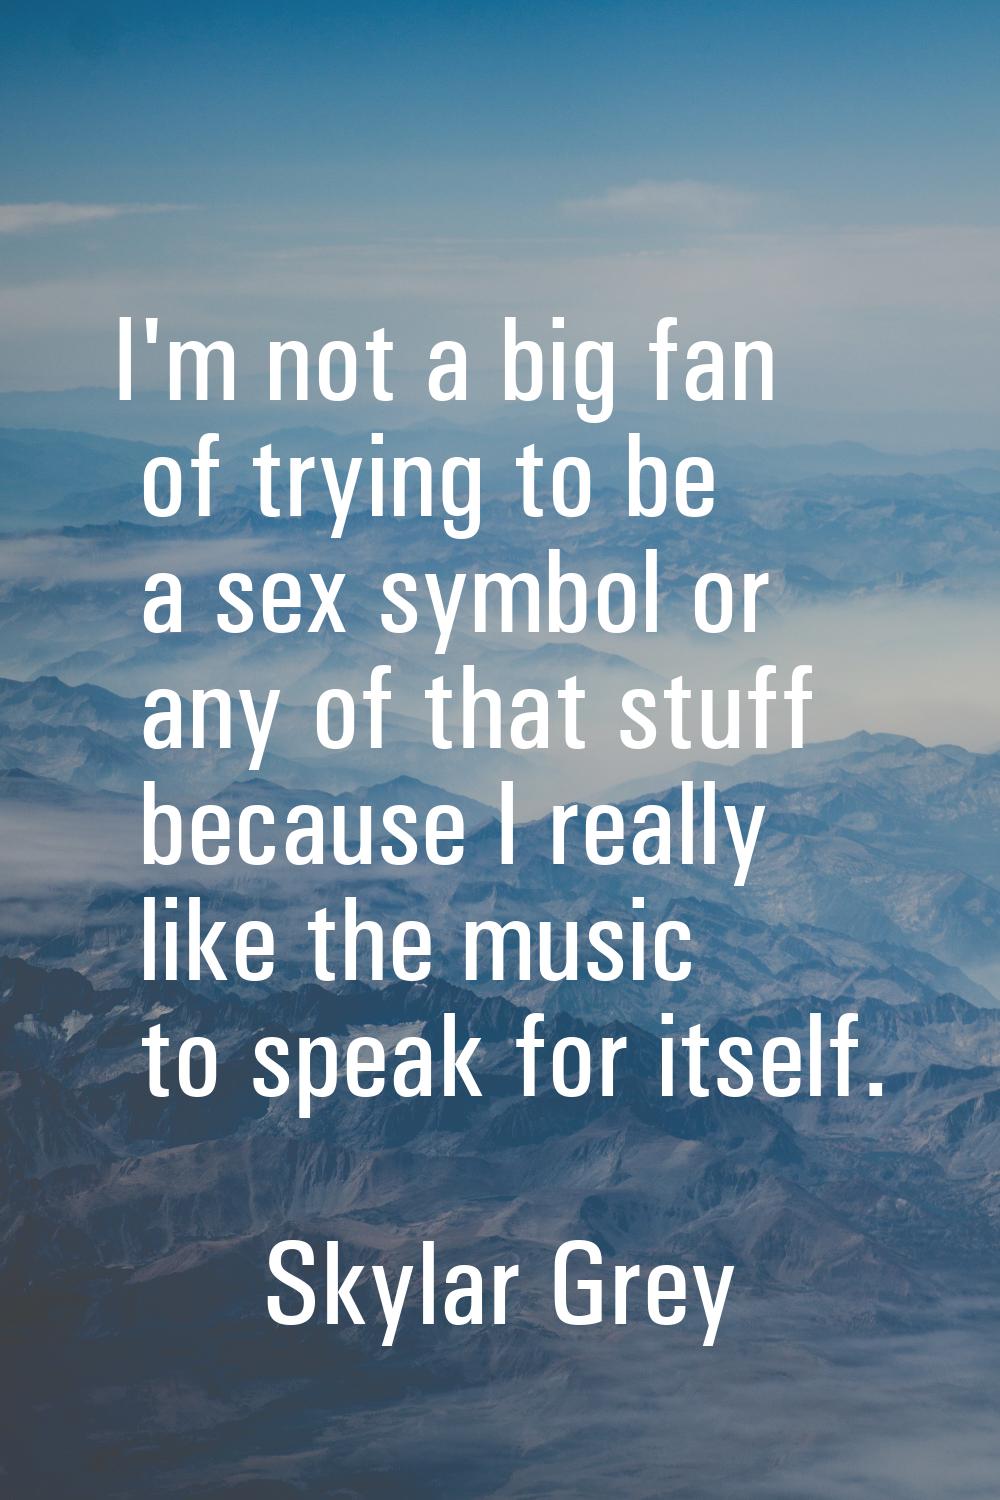 I'm not a big fan of trying to be a sex symbol or any of that stuff because I really like the music